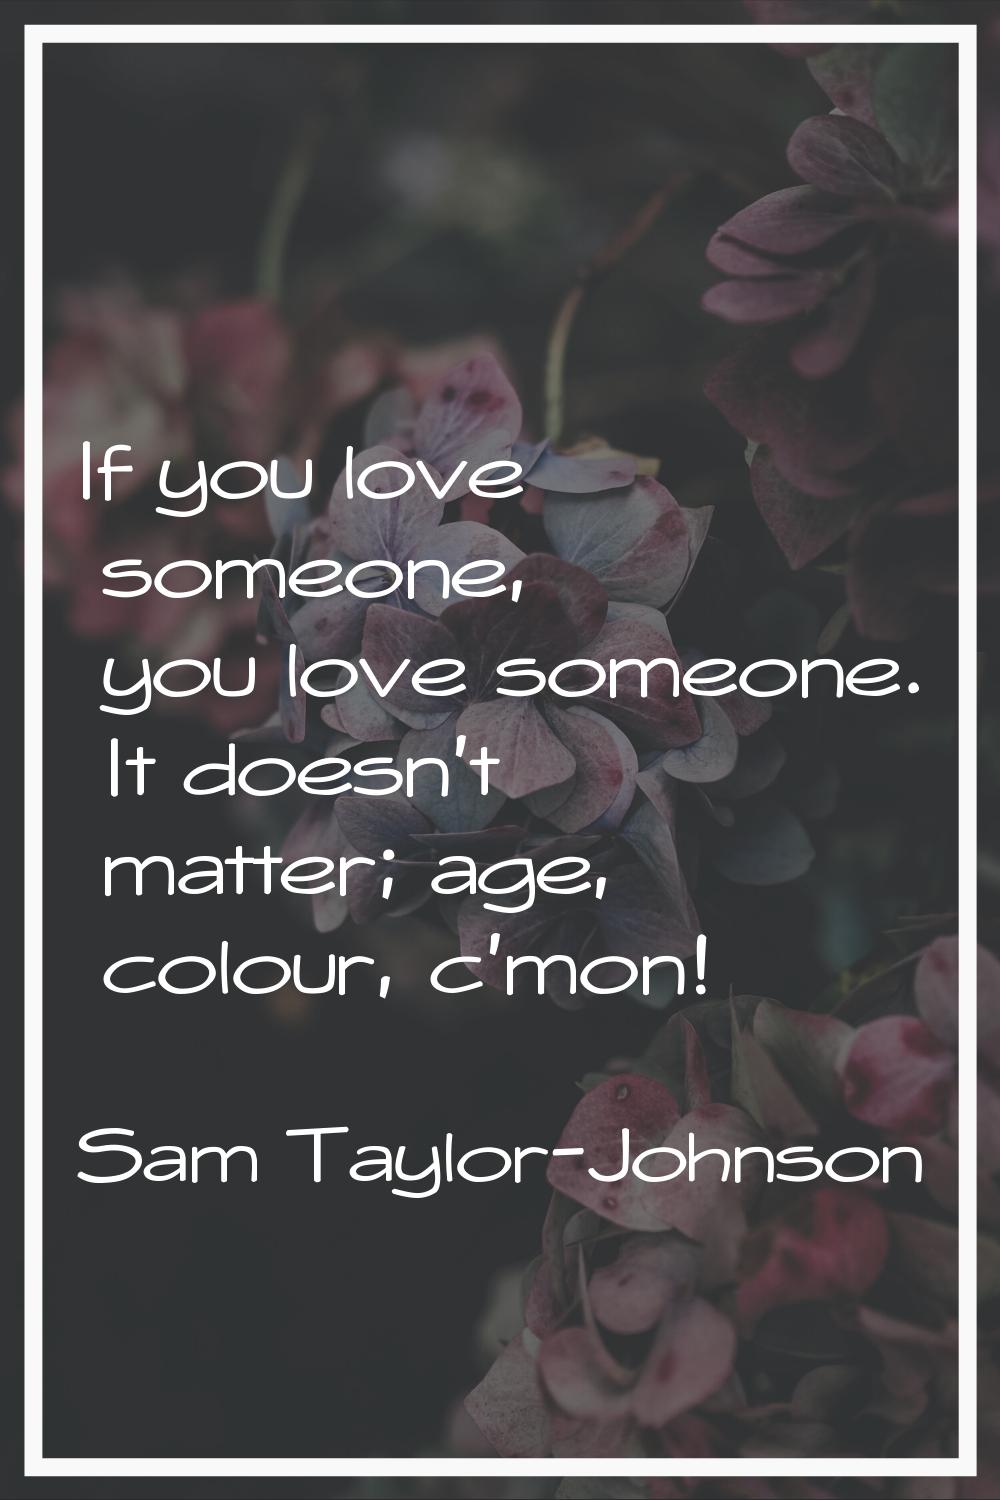 If you love someone, you love someone. It doesn't matter; age, colour, c'mon!